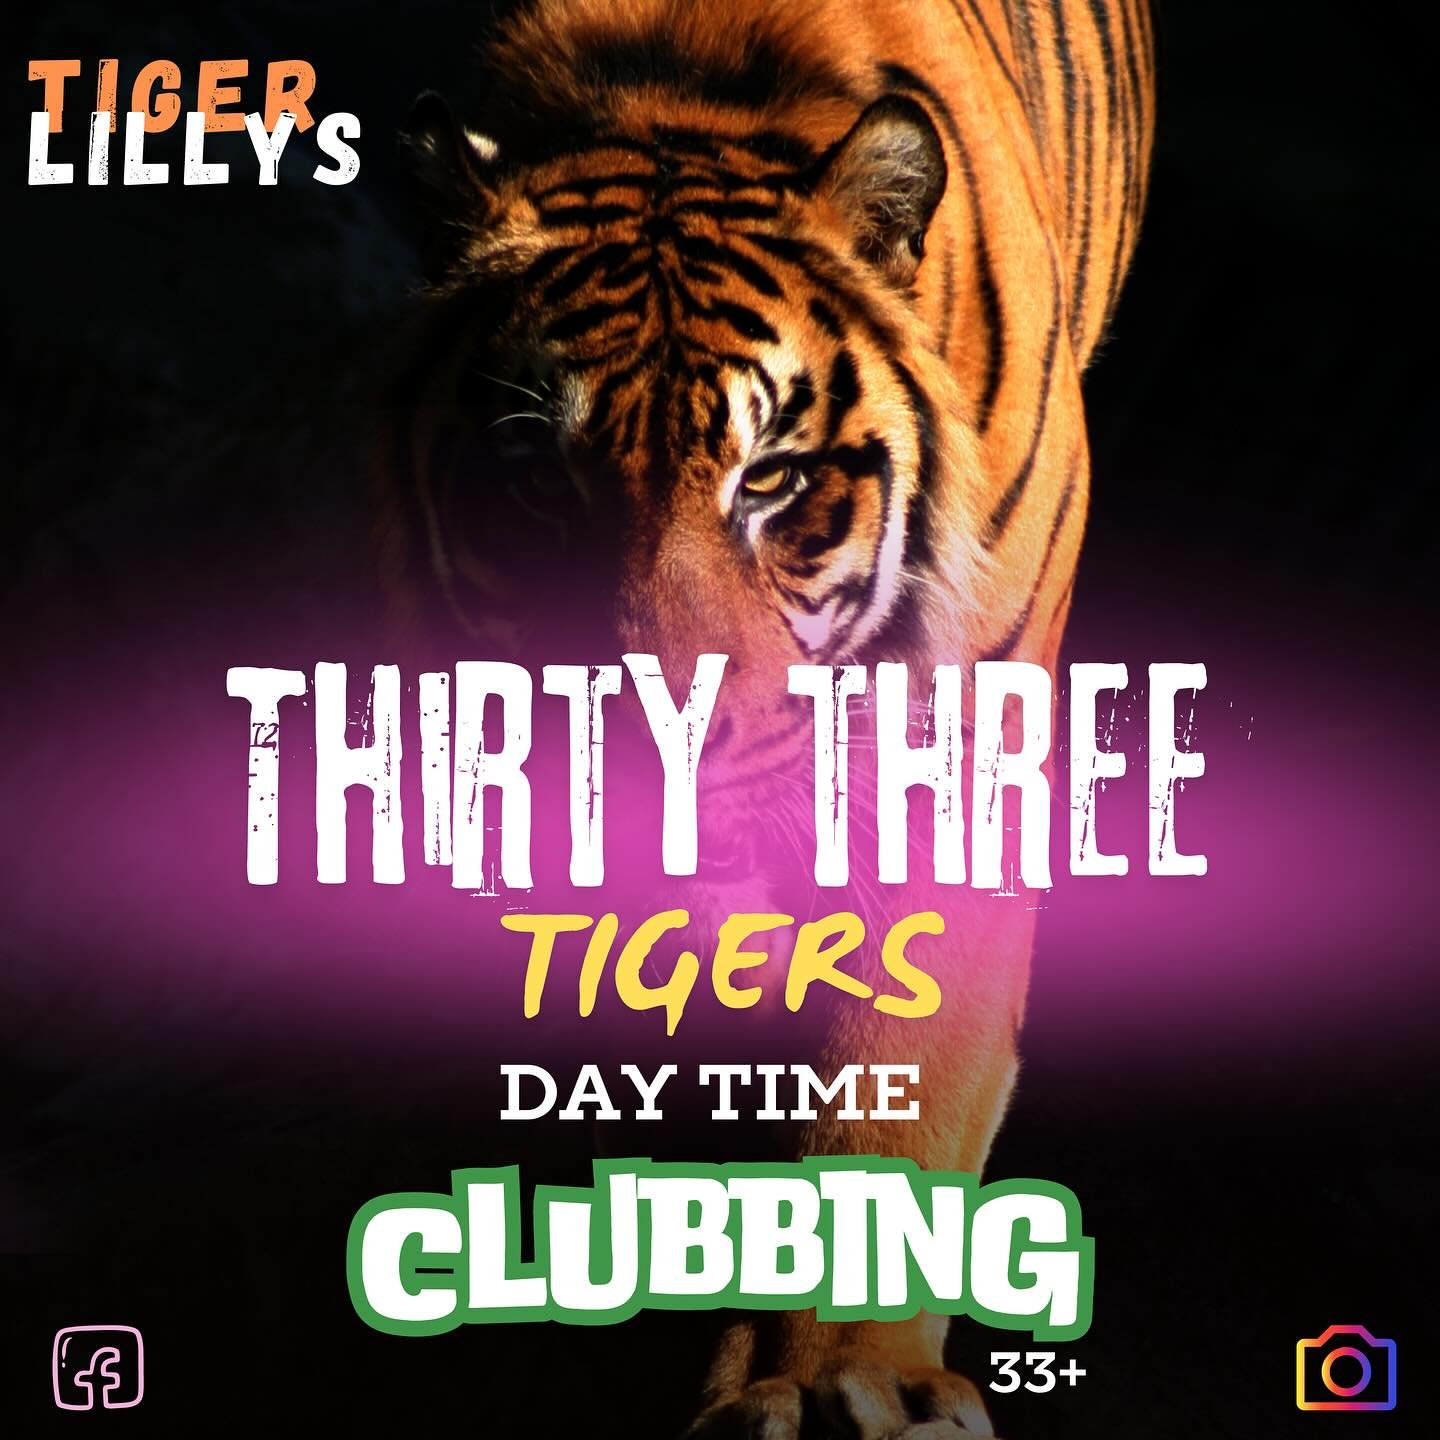 🐯 𝗧 𝗛 𝗜 𝗥 𝗧 𝗬  𝗧 𝗛 𝗥 𝗘 𝗘  𝗧 𝗜 𝗚 𝗘 𝗥 𝗦 🐯 
D A Y  T I M E  C L U B B I N G
T I G E R  L I L L Y S 
𝕔𝕠𝕞𝕚𝕟𝕘 𝕥𝕠 𝕆𝕞𝕒𝕘𝕙 𝕥𝕙𝕚𝕤 𝕊𝕦𝕞𝕞𝕖𝕣
keep your 👀 peeled for the deets!! 
Live DJ Sets ✅ 
Entertainment Galore ✅ 
Party 